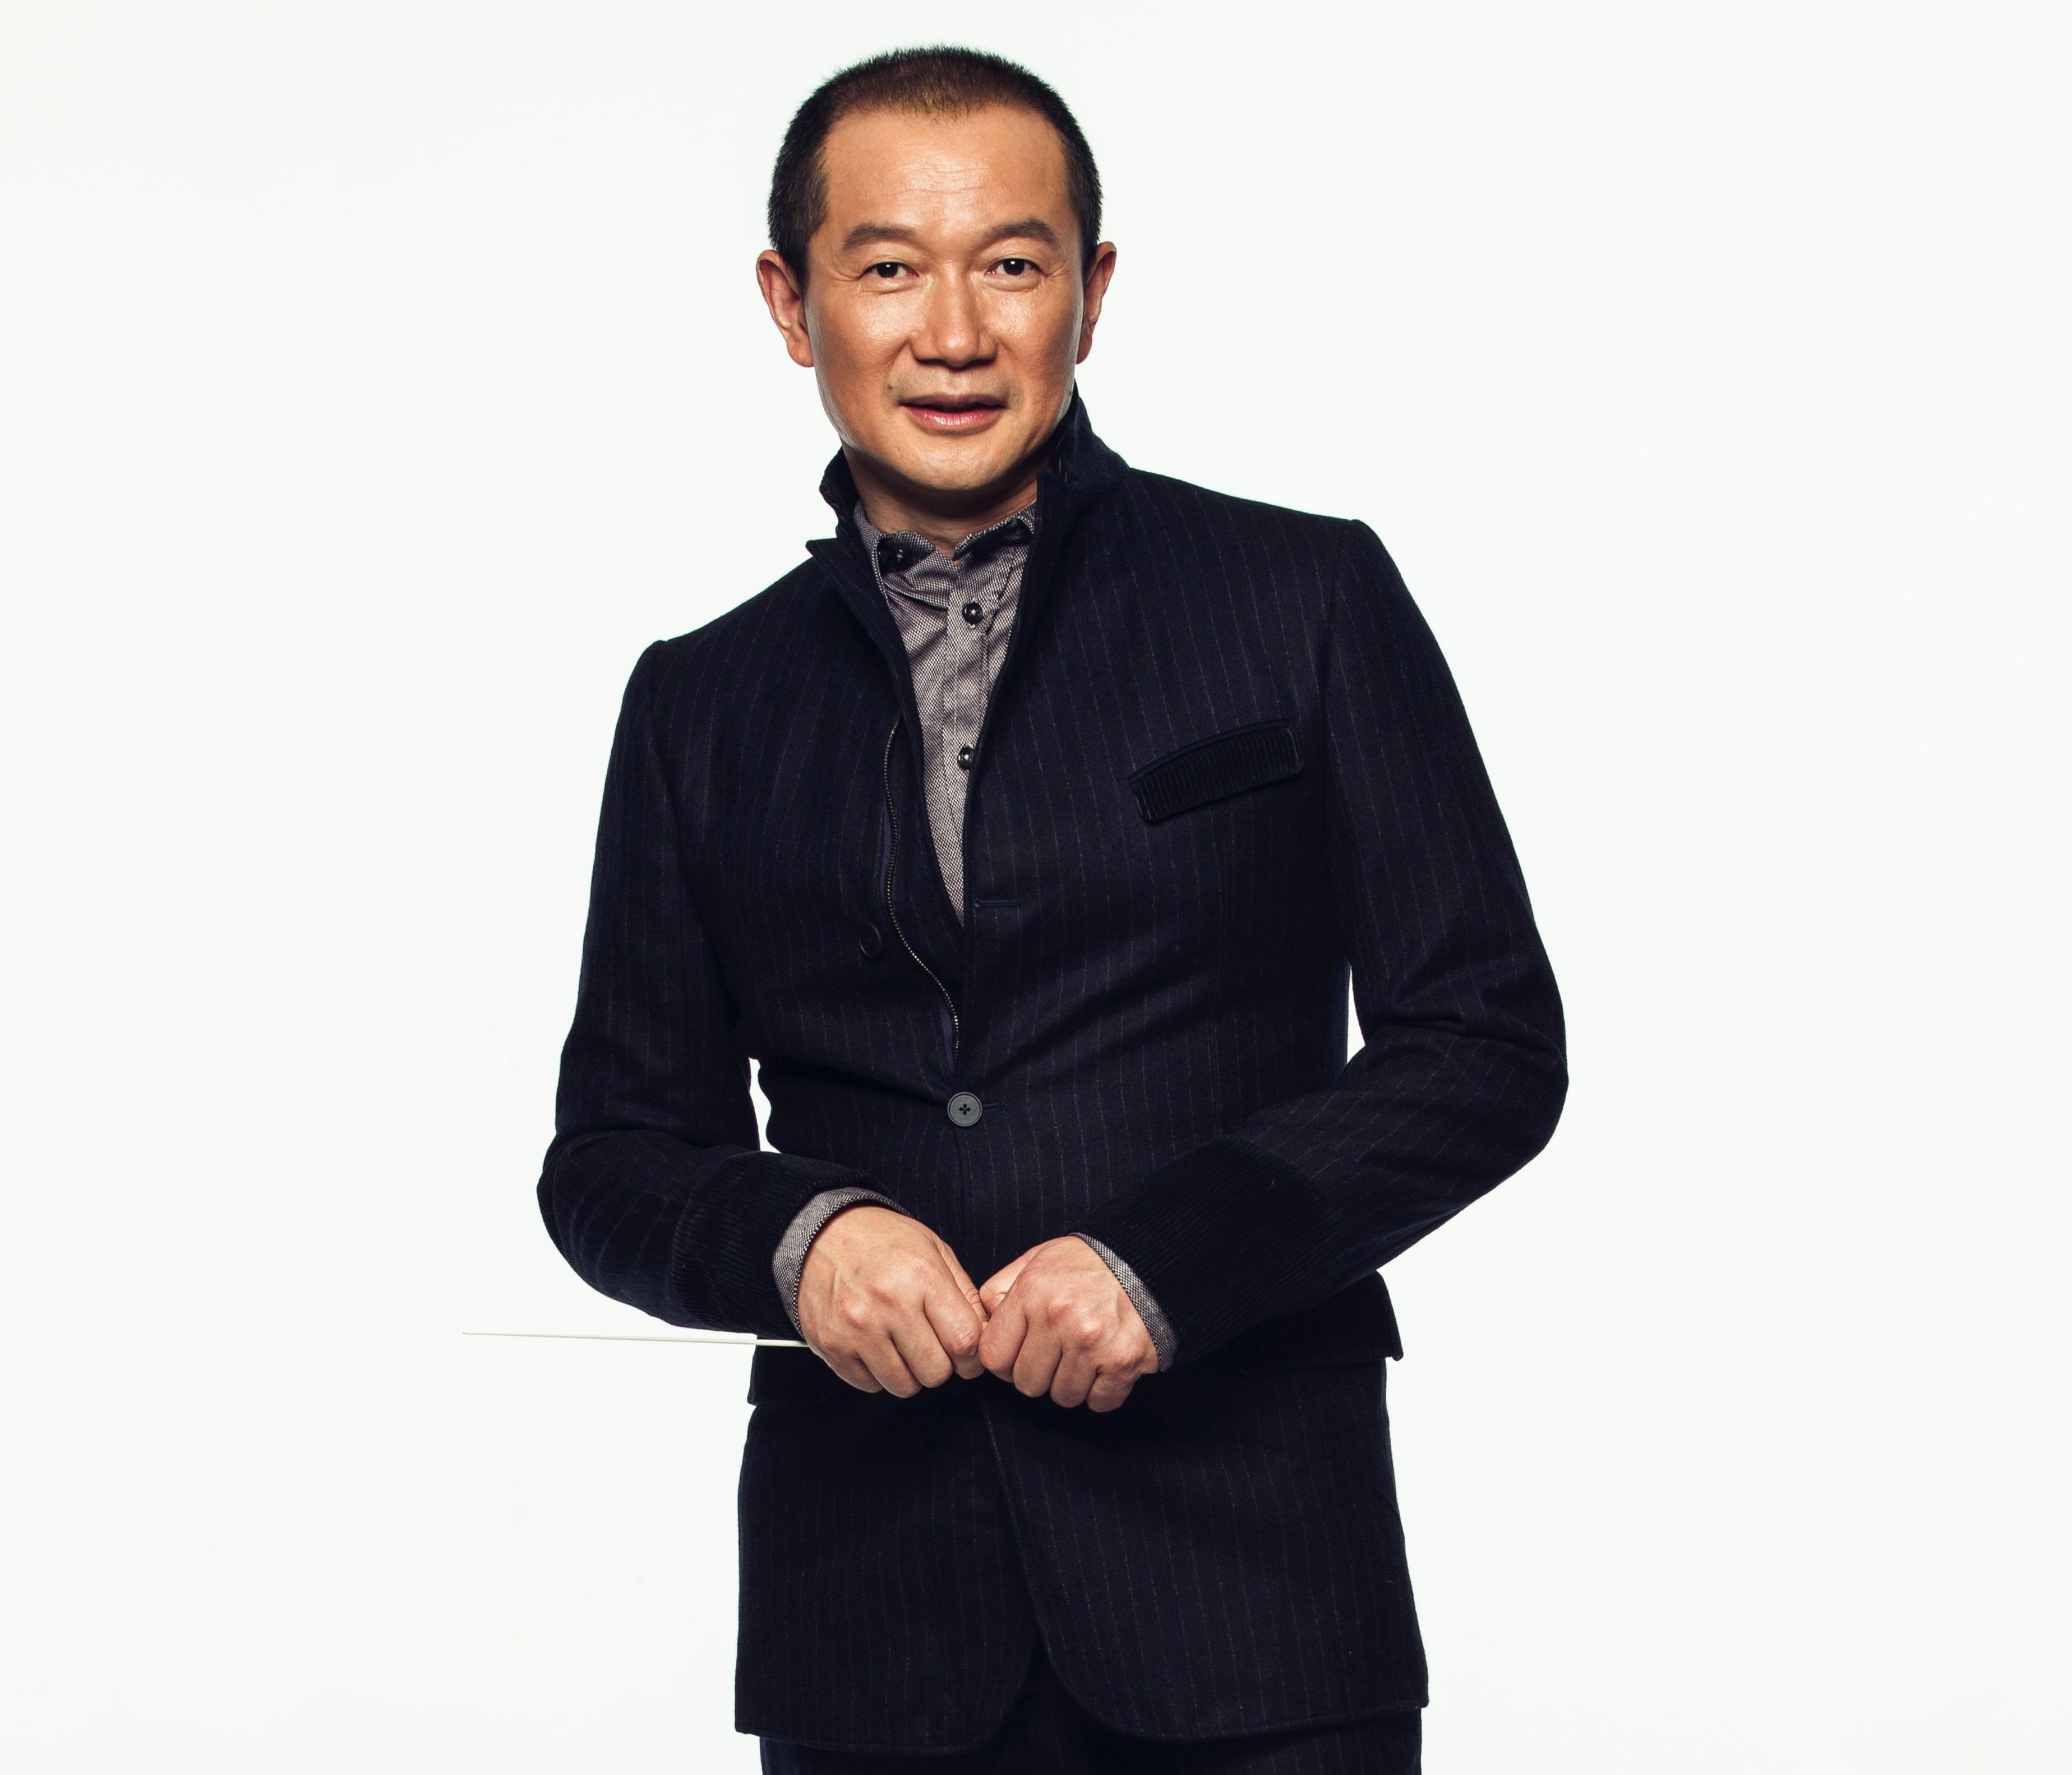 The Leisure and Cultural Services Department's "Tan Dun WE-Festival" will feature "Tan Dun: BACH Rock & Hanggai - When BACH meets GENGHIS KHAN" as the finale in December. Photo shows Tan Dun.